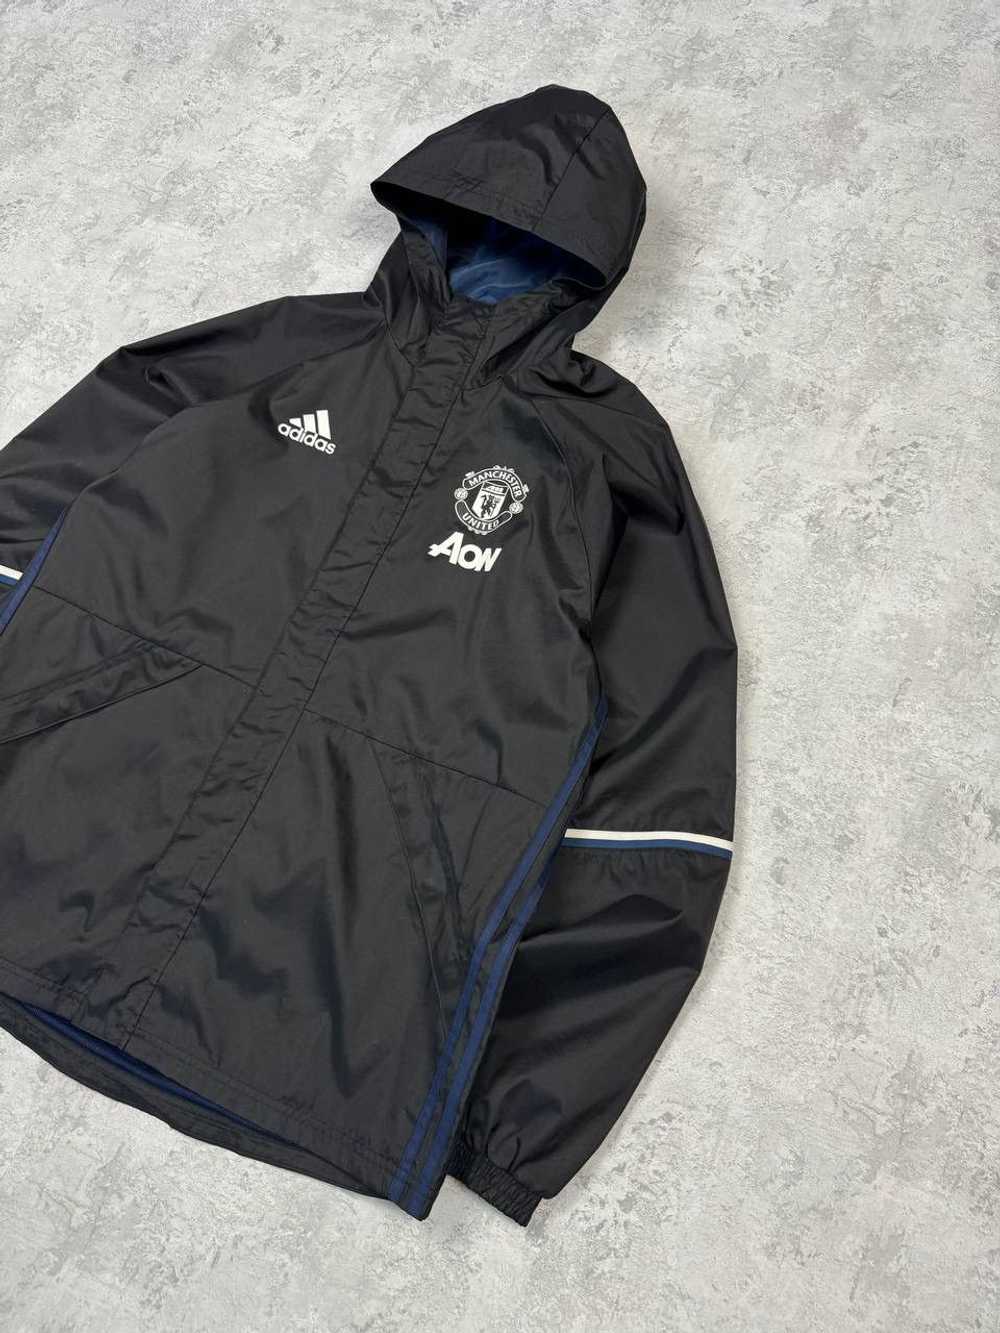 Adidas × Manchester United × Soccer Jersey Vintag… - image 3